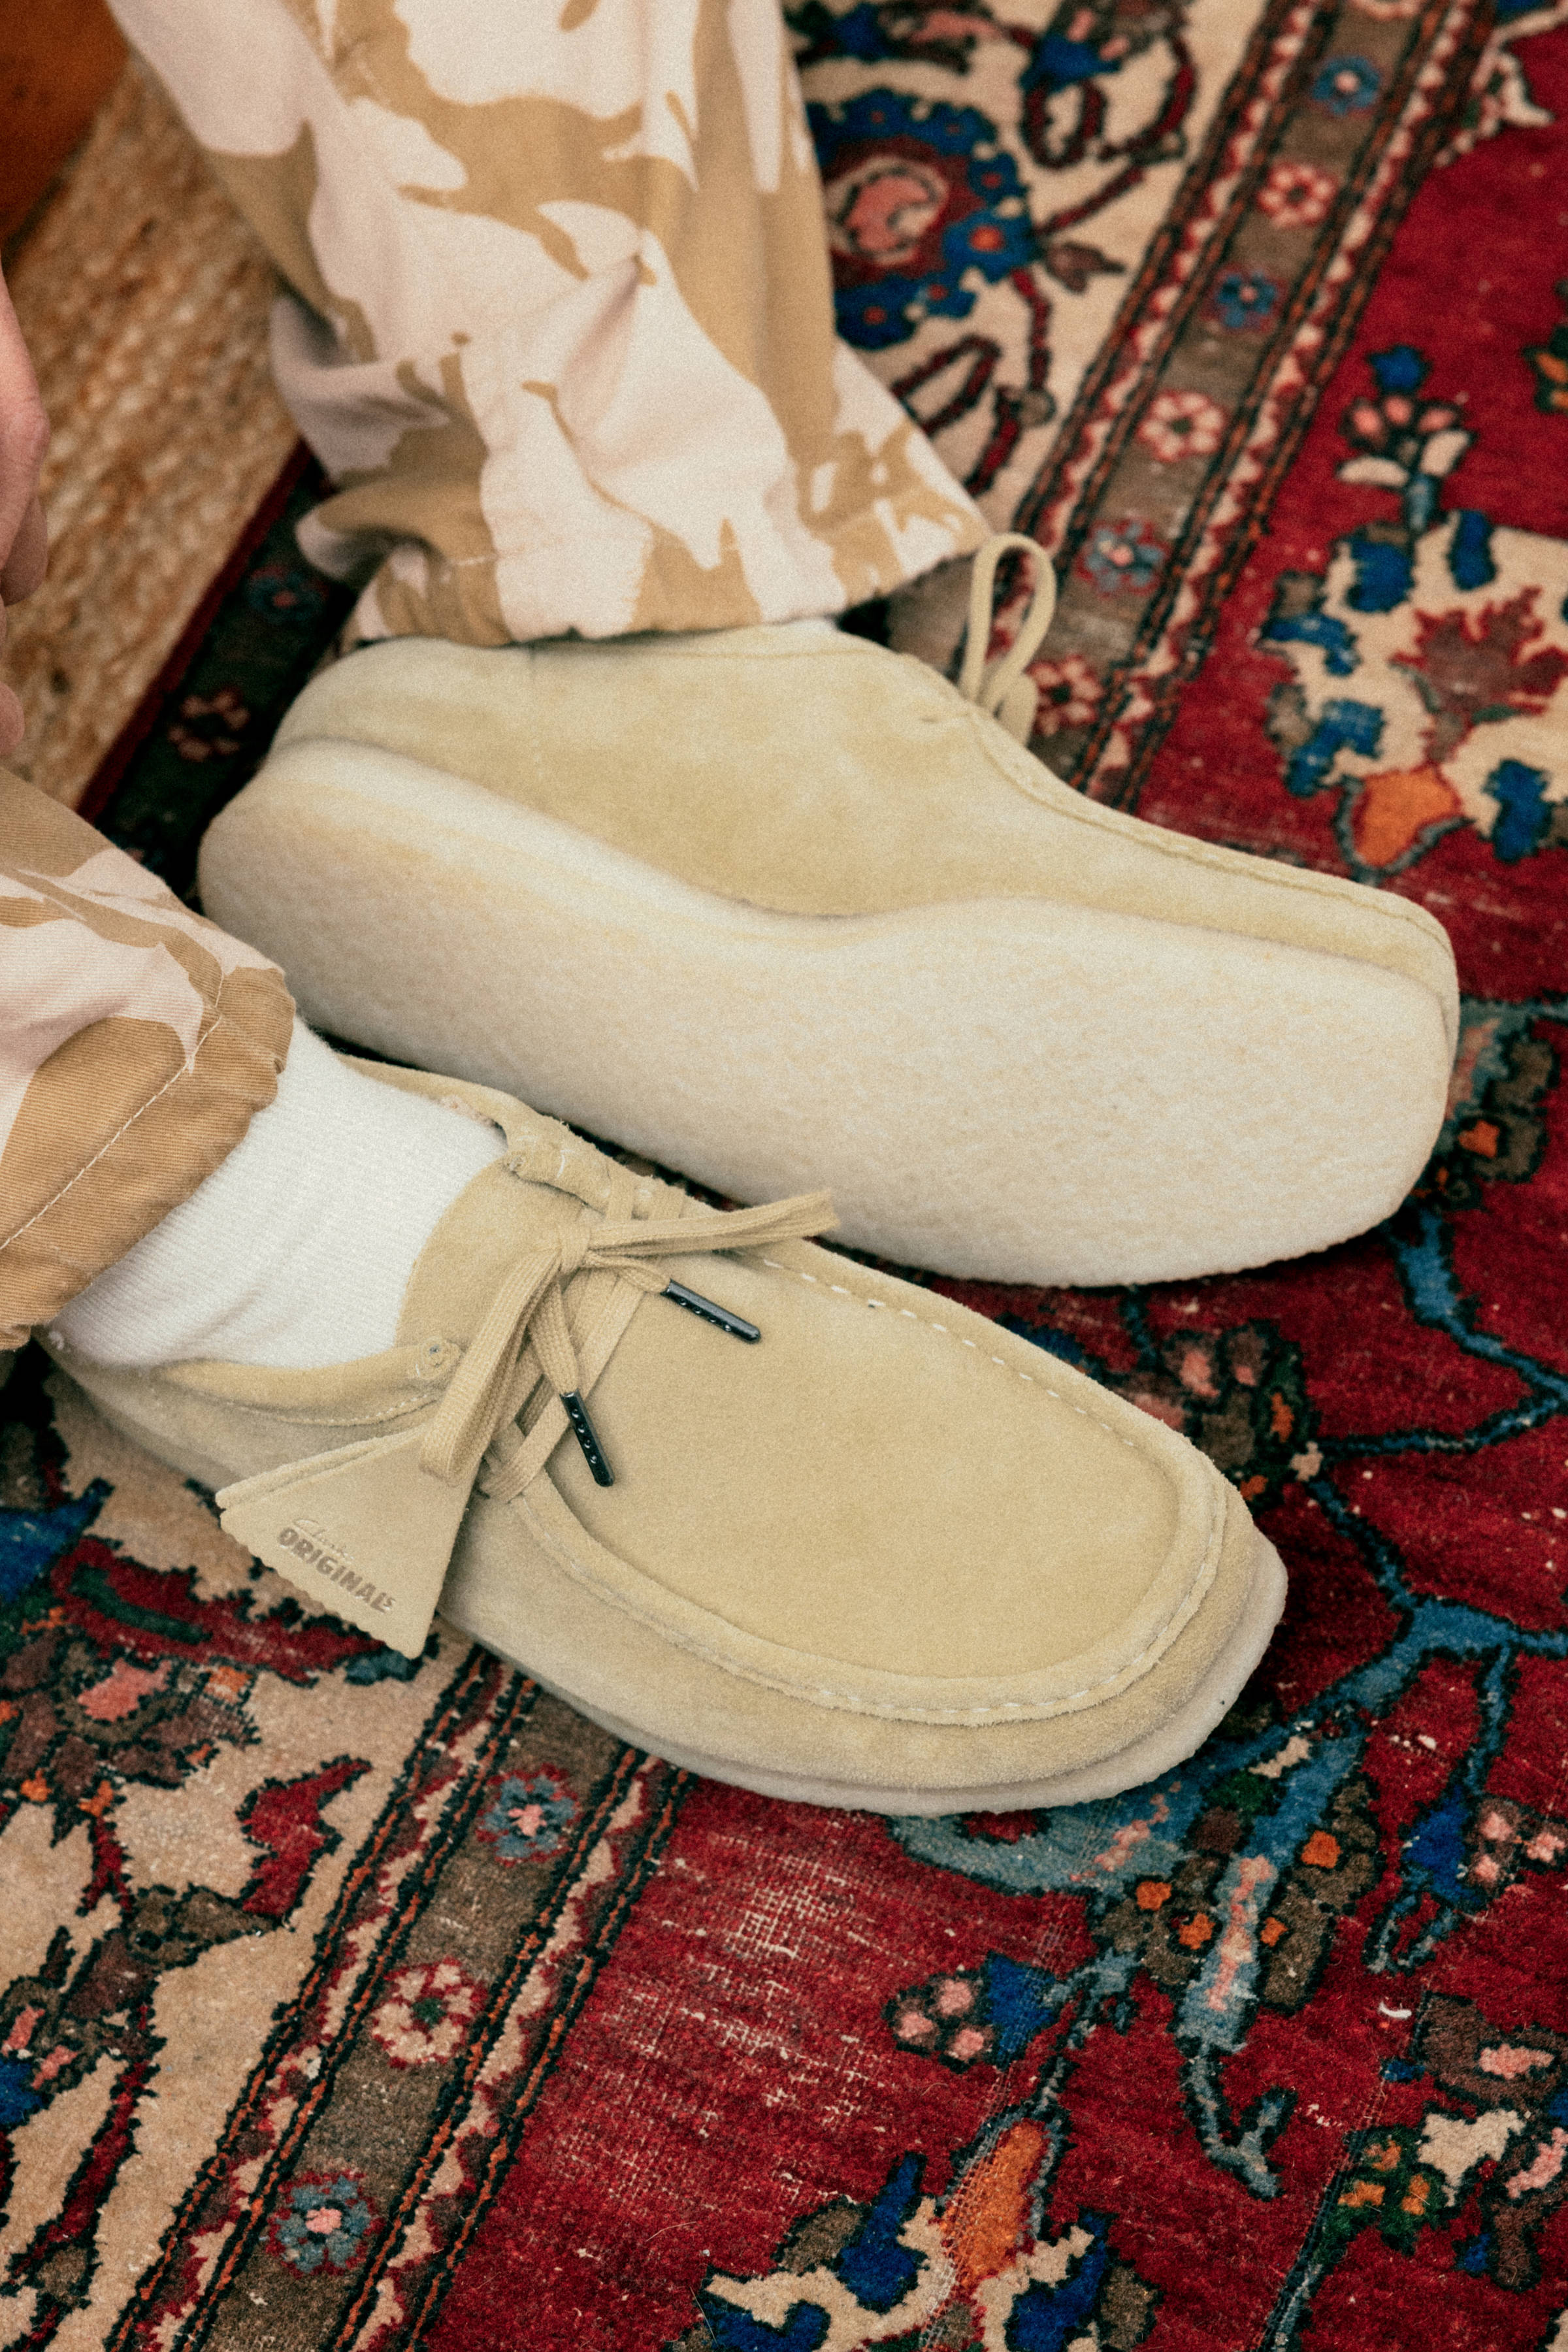 Close-up of a person wearing Clarks Originals on a rug floor